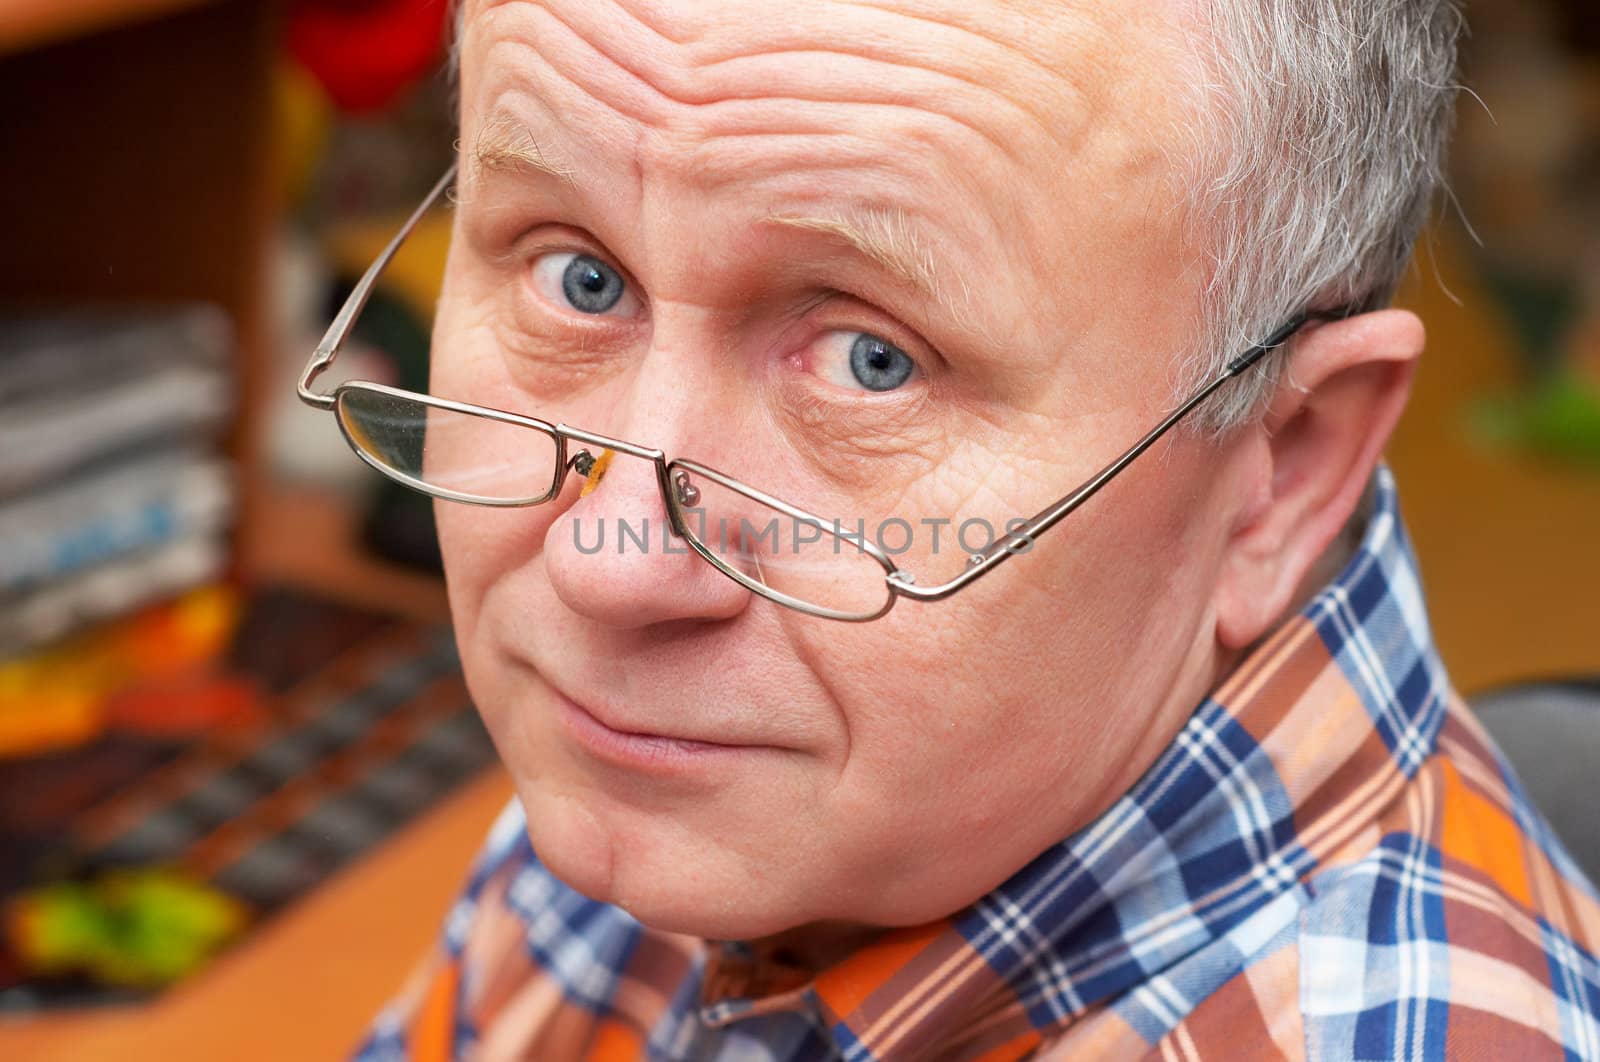 Casual senior man with glasses. emotional portrait series.